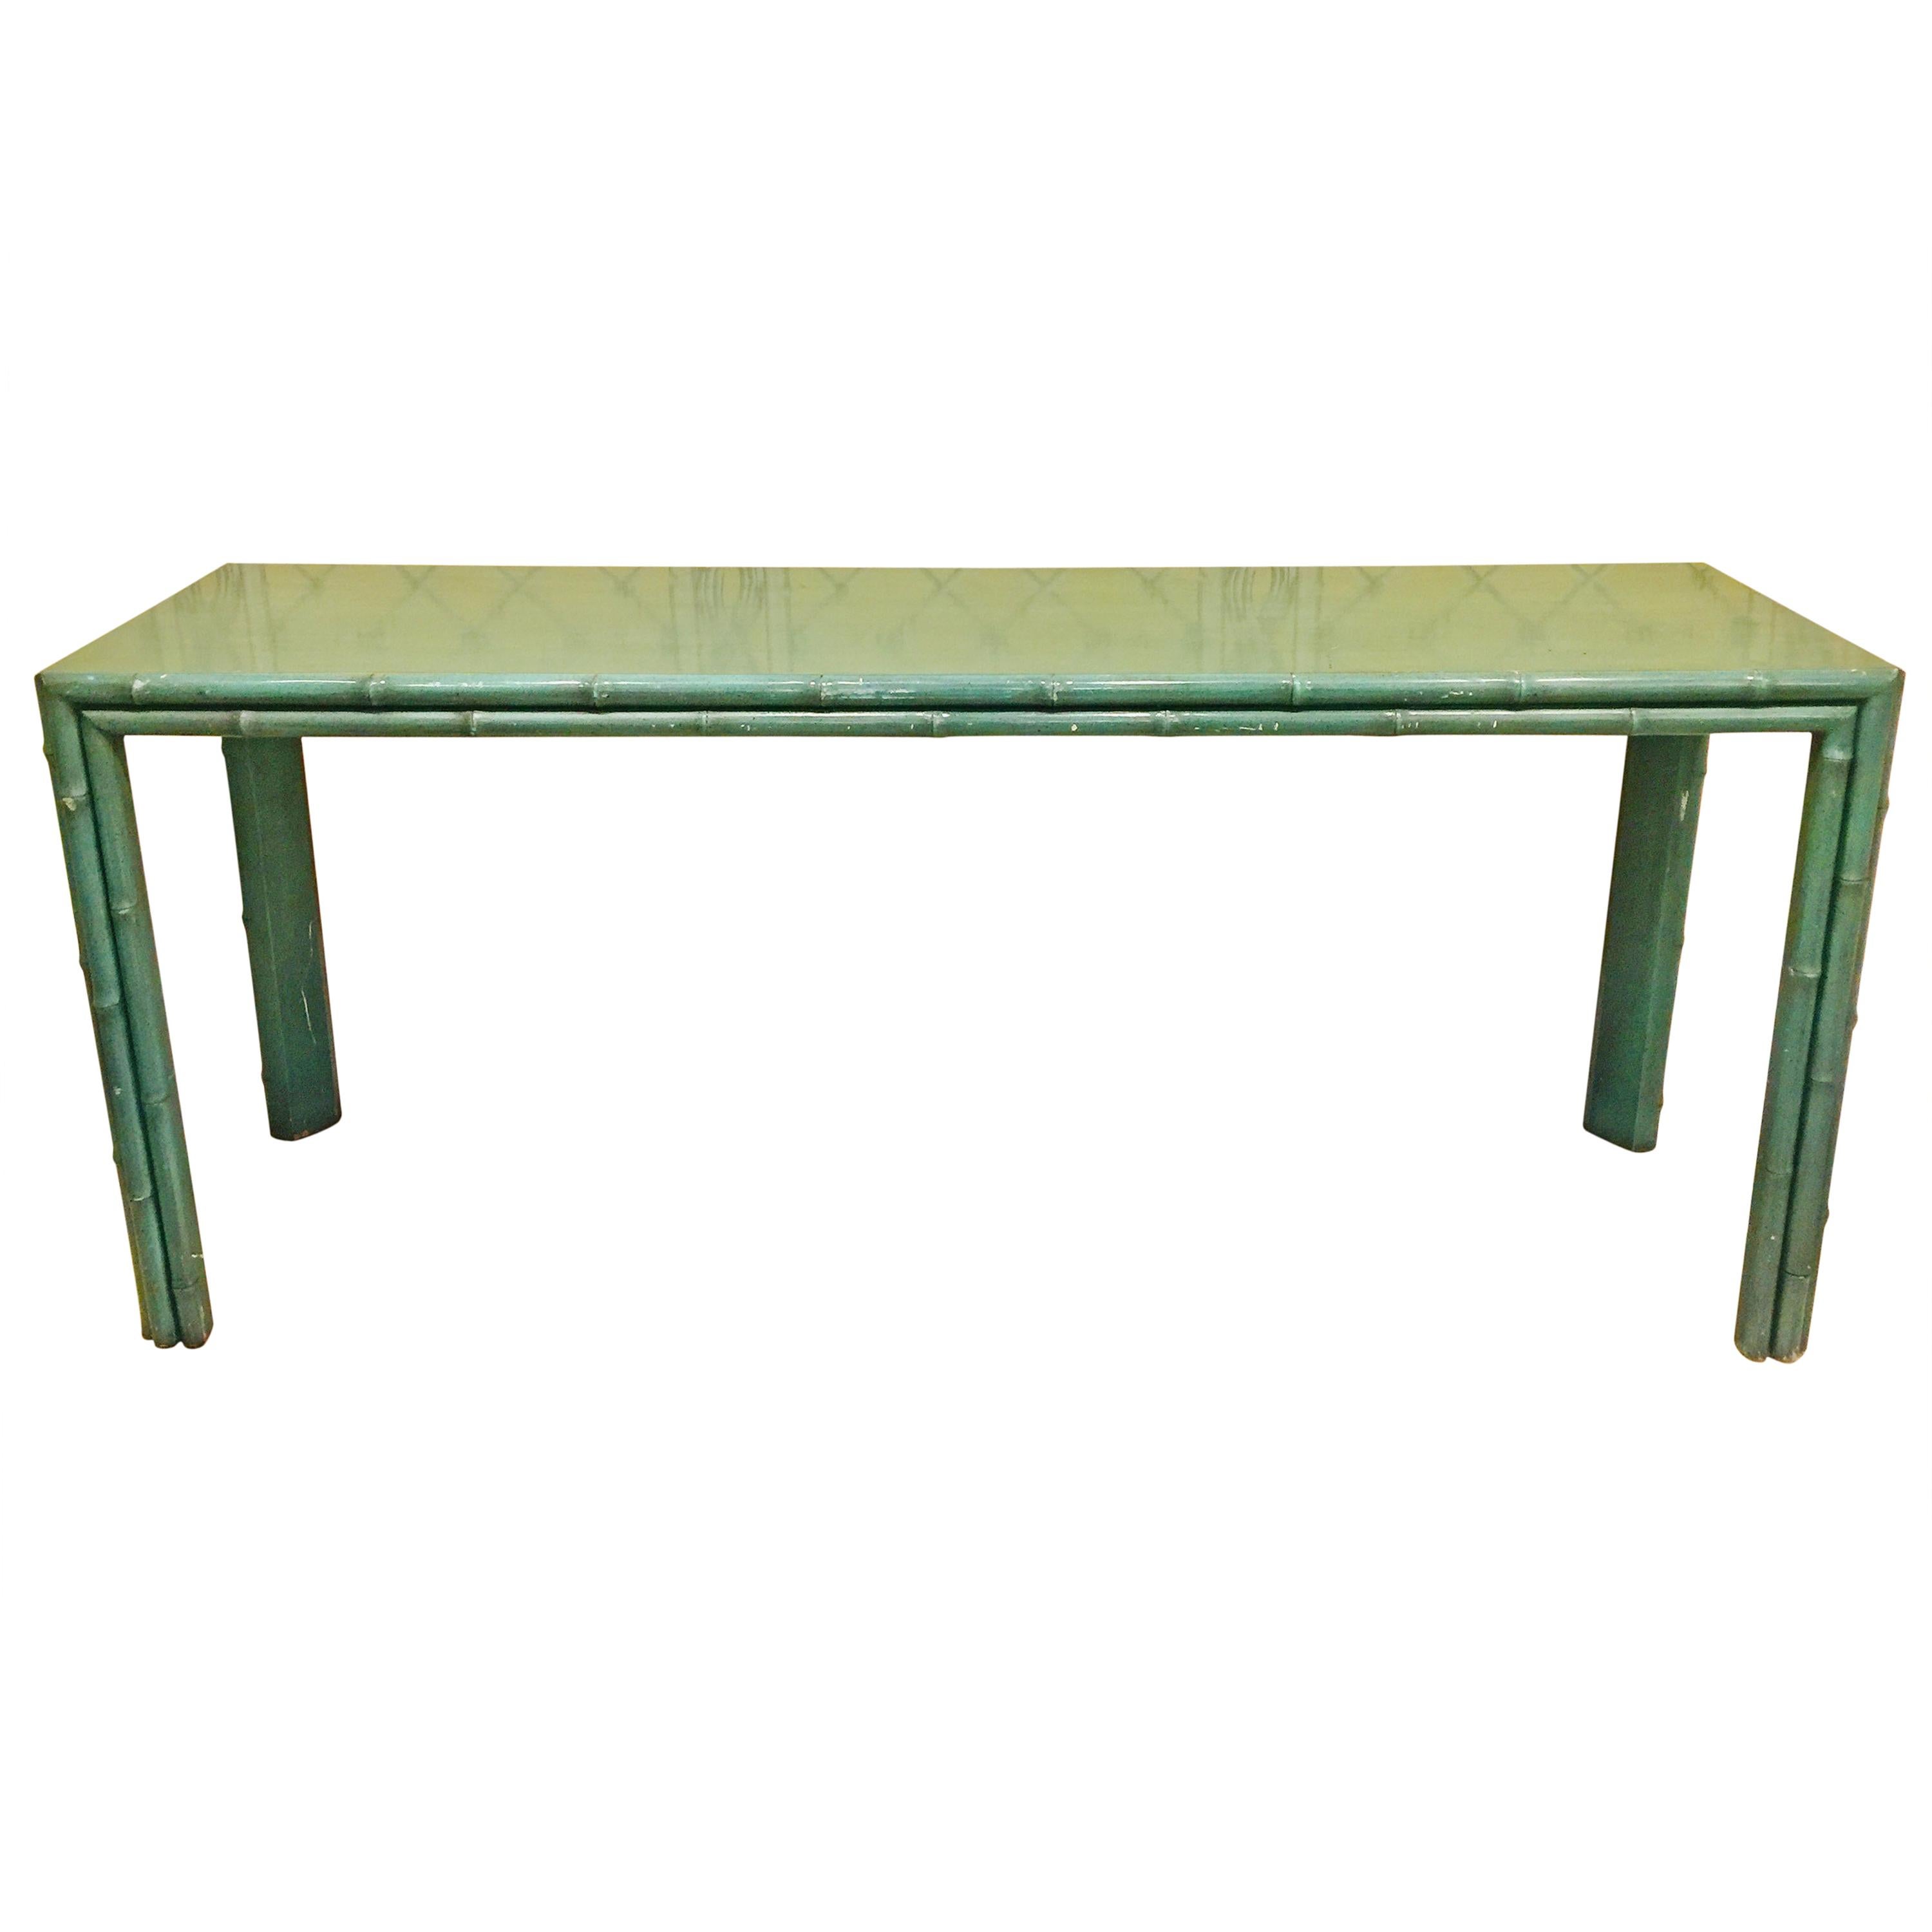 American Midcentury Green Painted Bamboo Style Console, circa 1960-1970